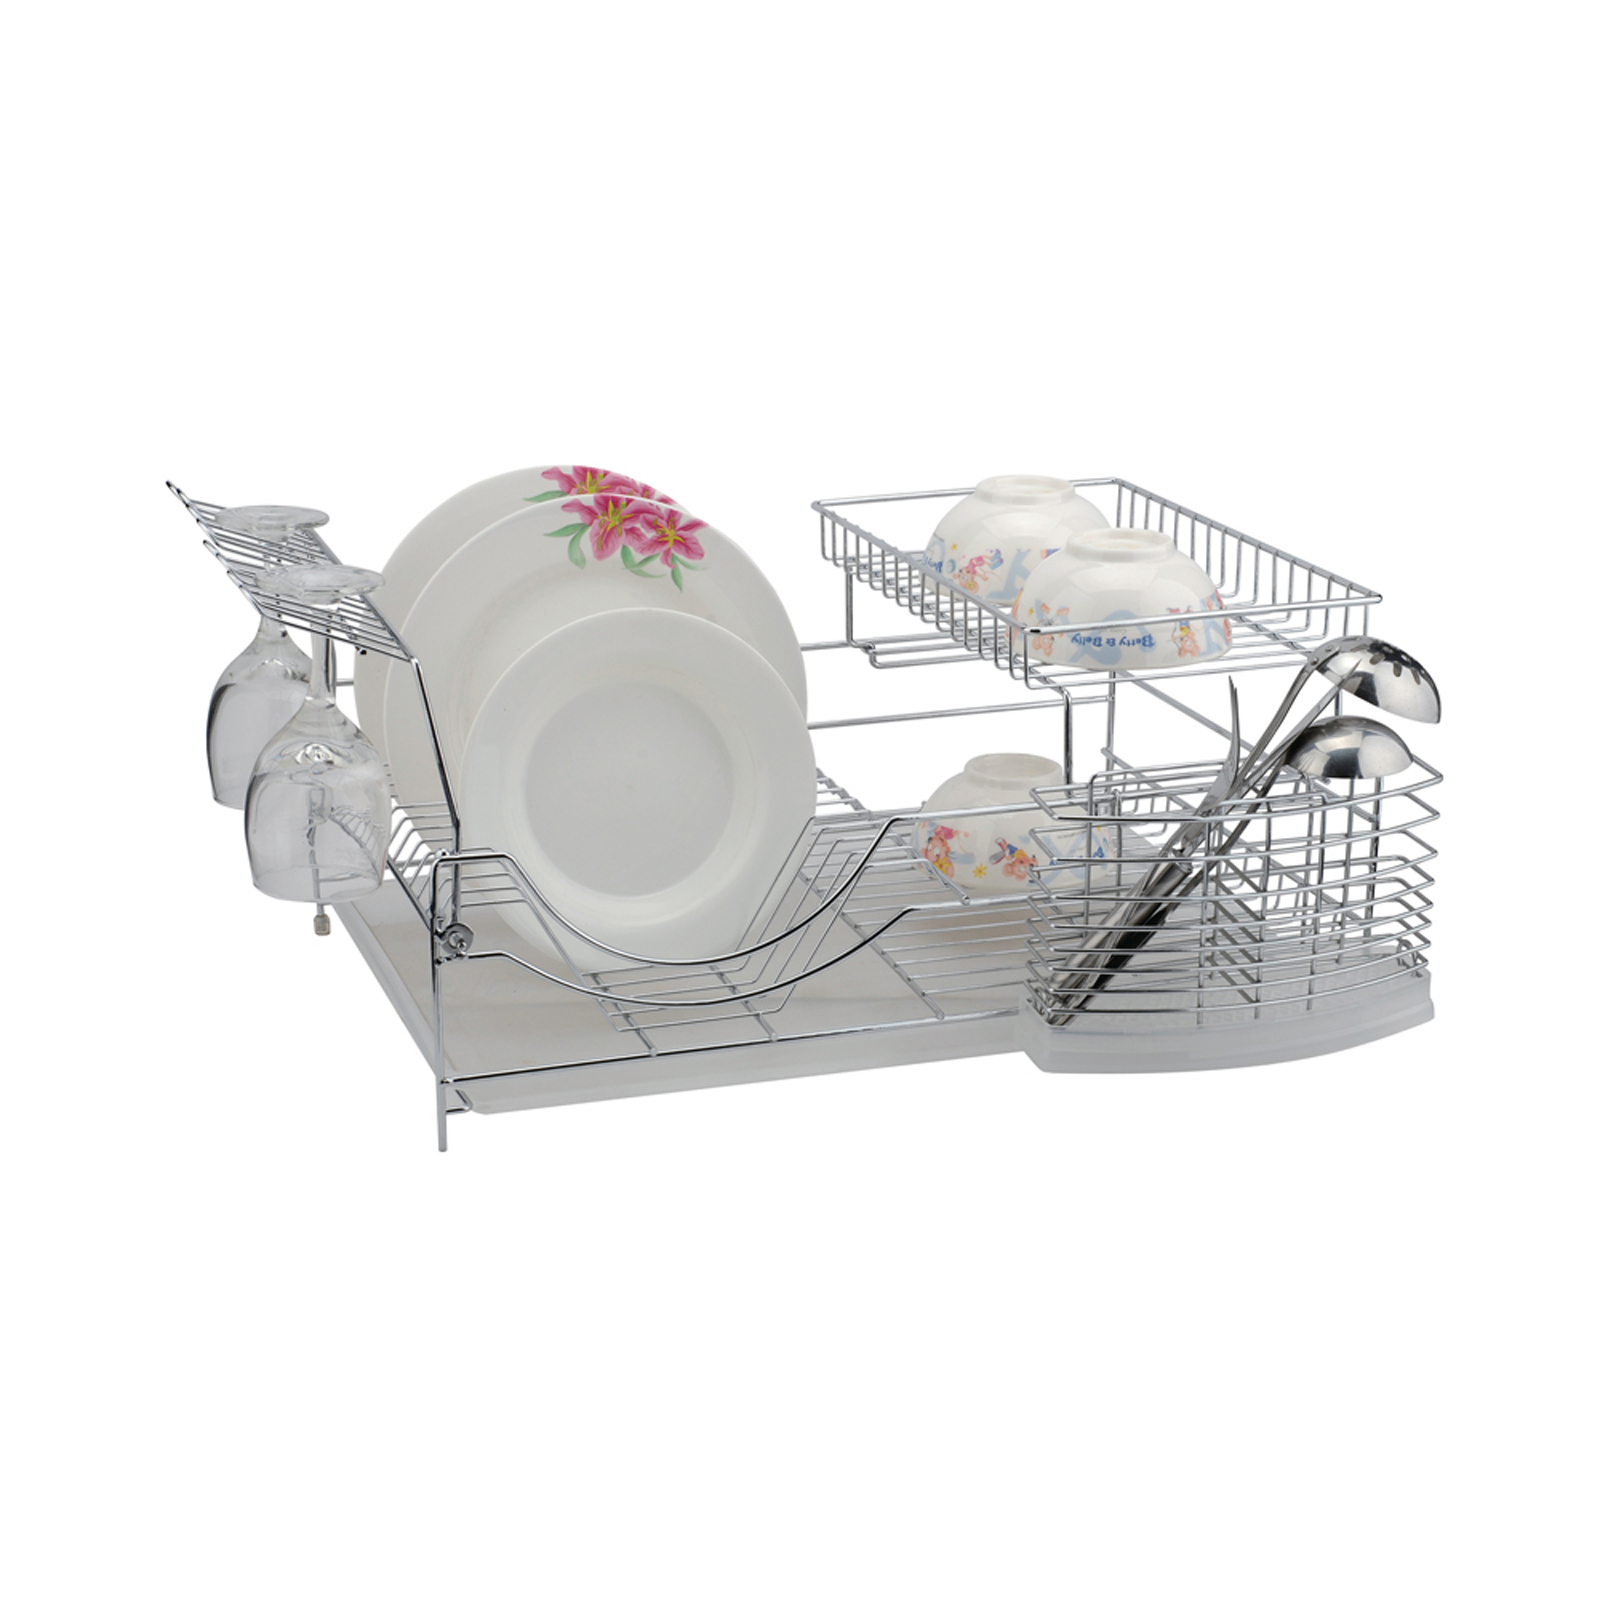 Rubbermaid 12.49 In. x 14.31 In. Chrome Wire Sink Dish Drainer